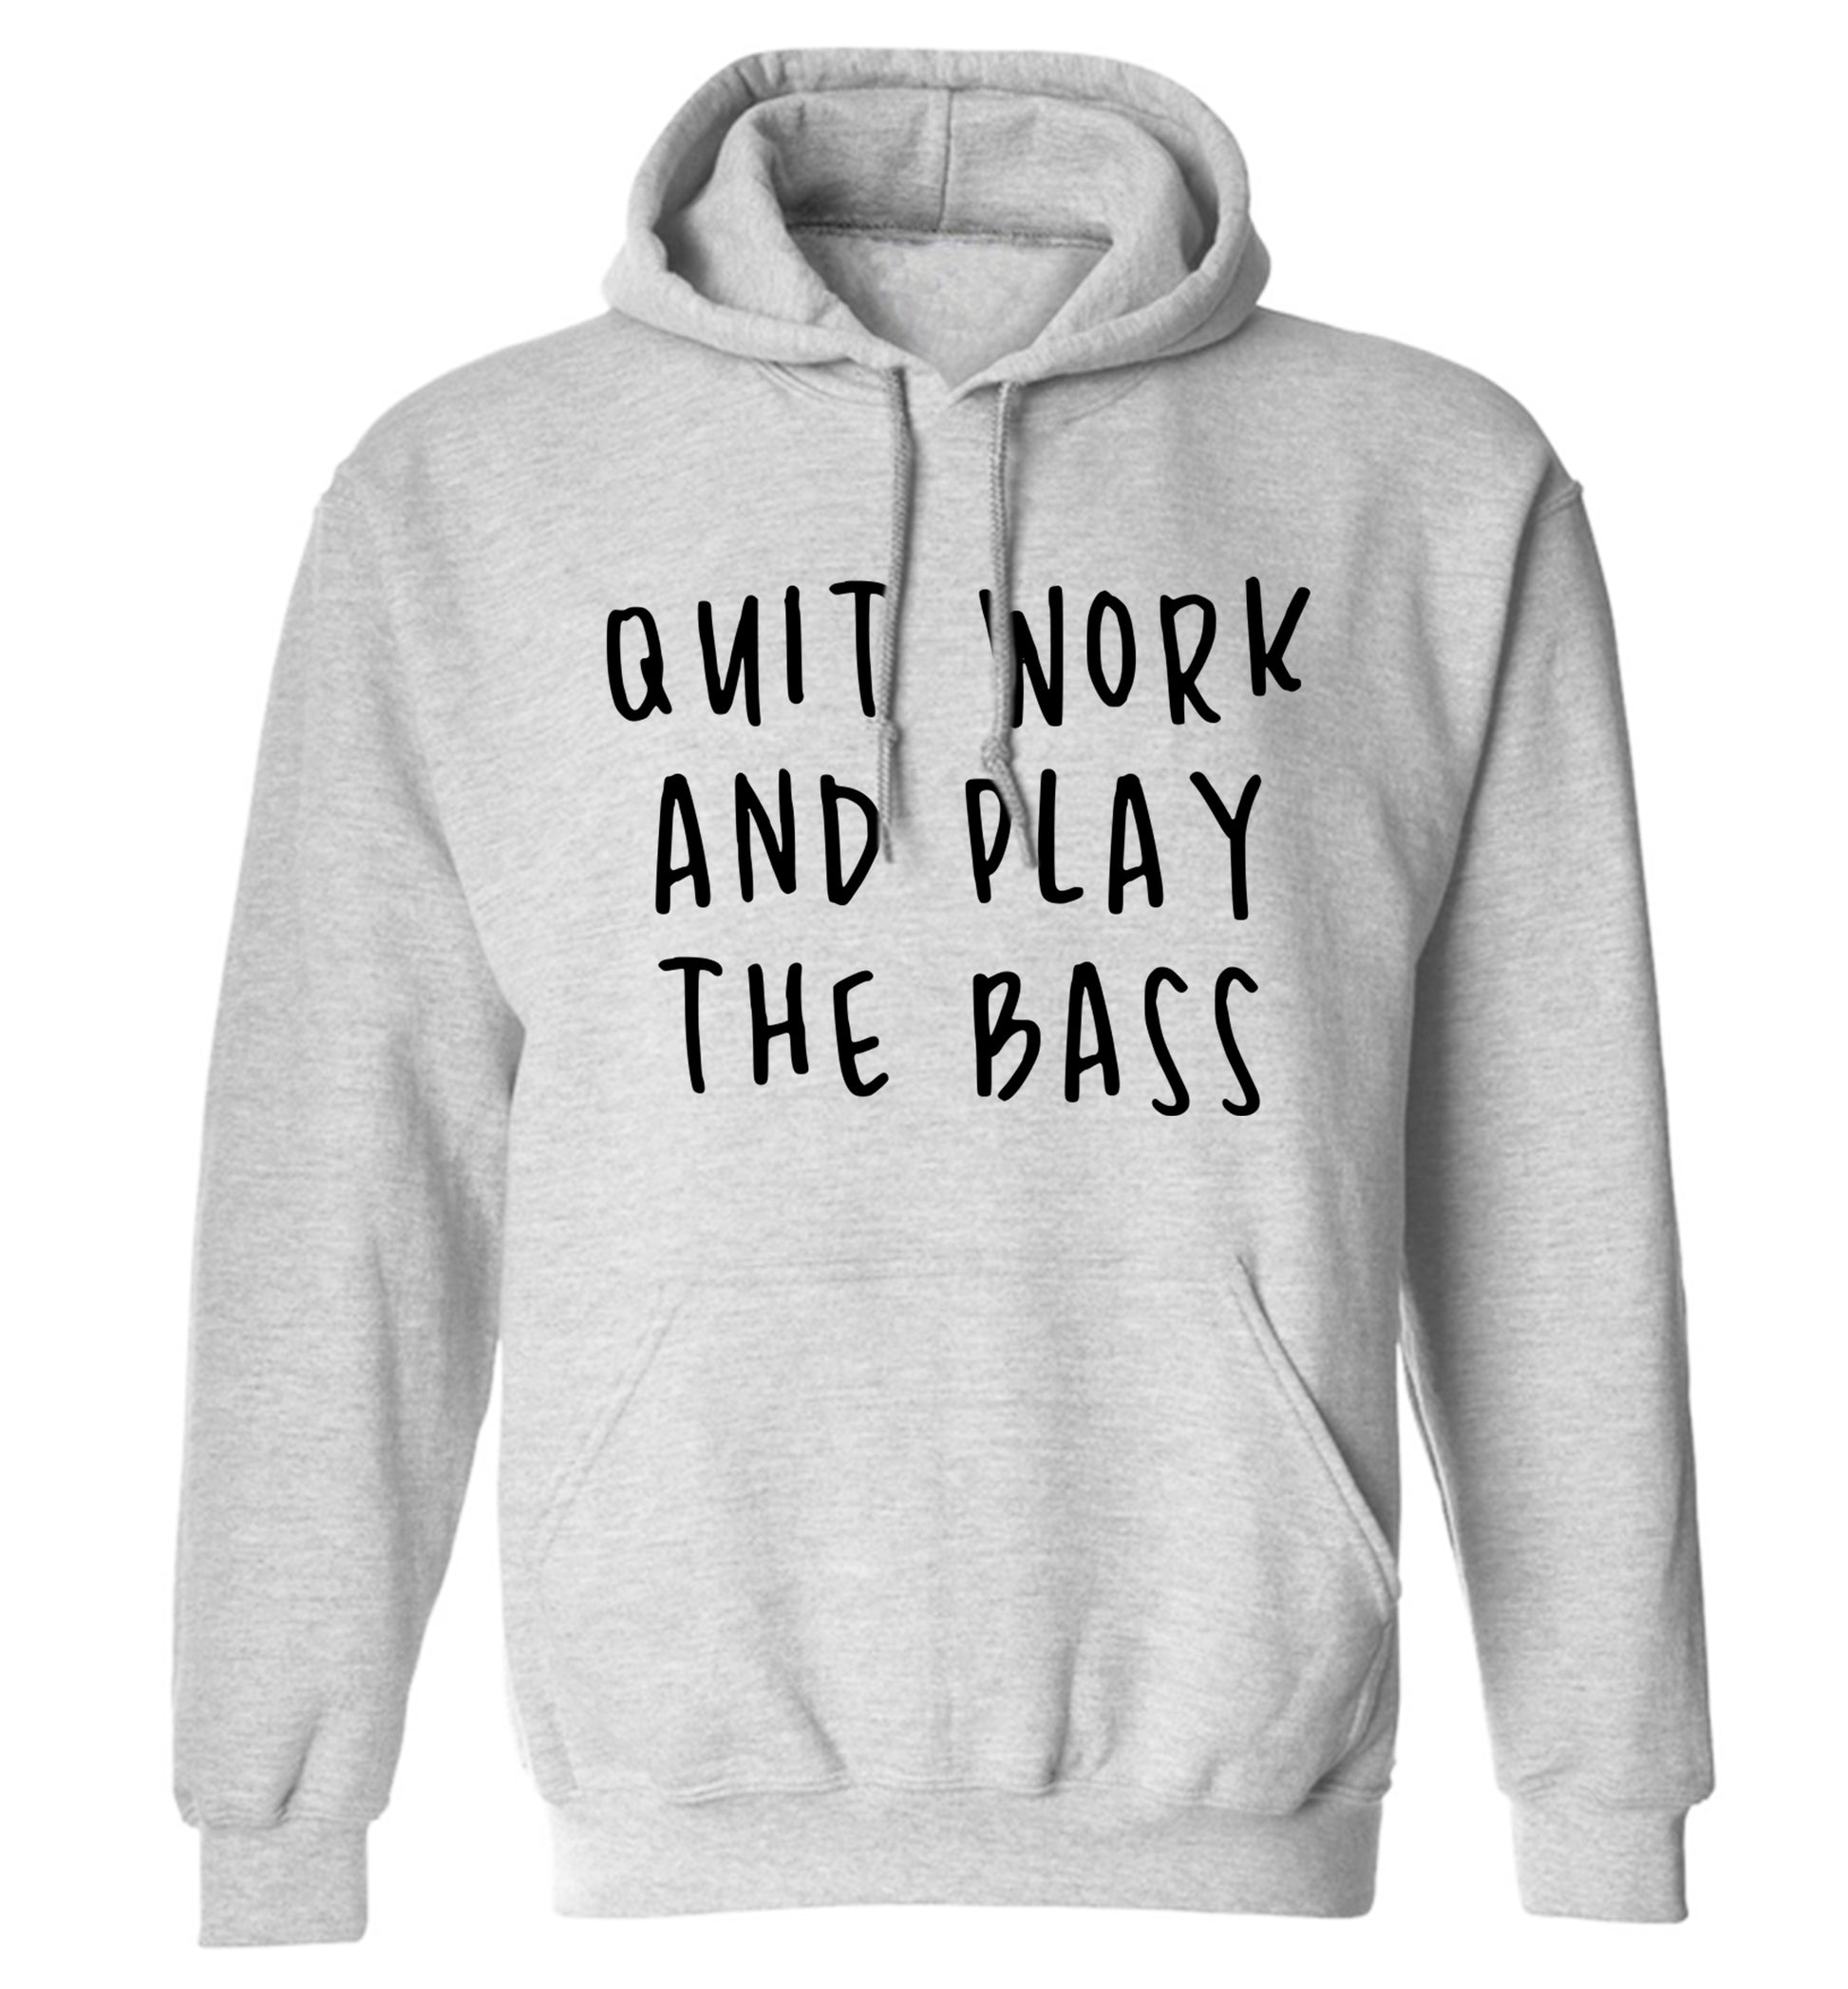 Quit work and play the bass adults unisex grey hoodie 2XL